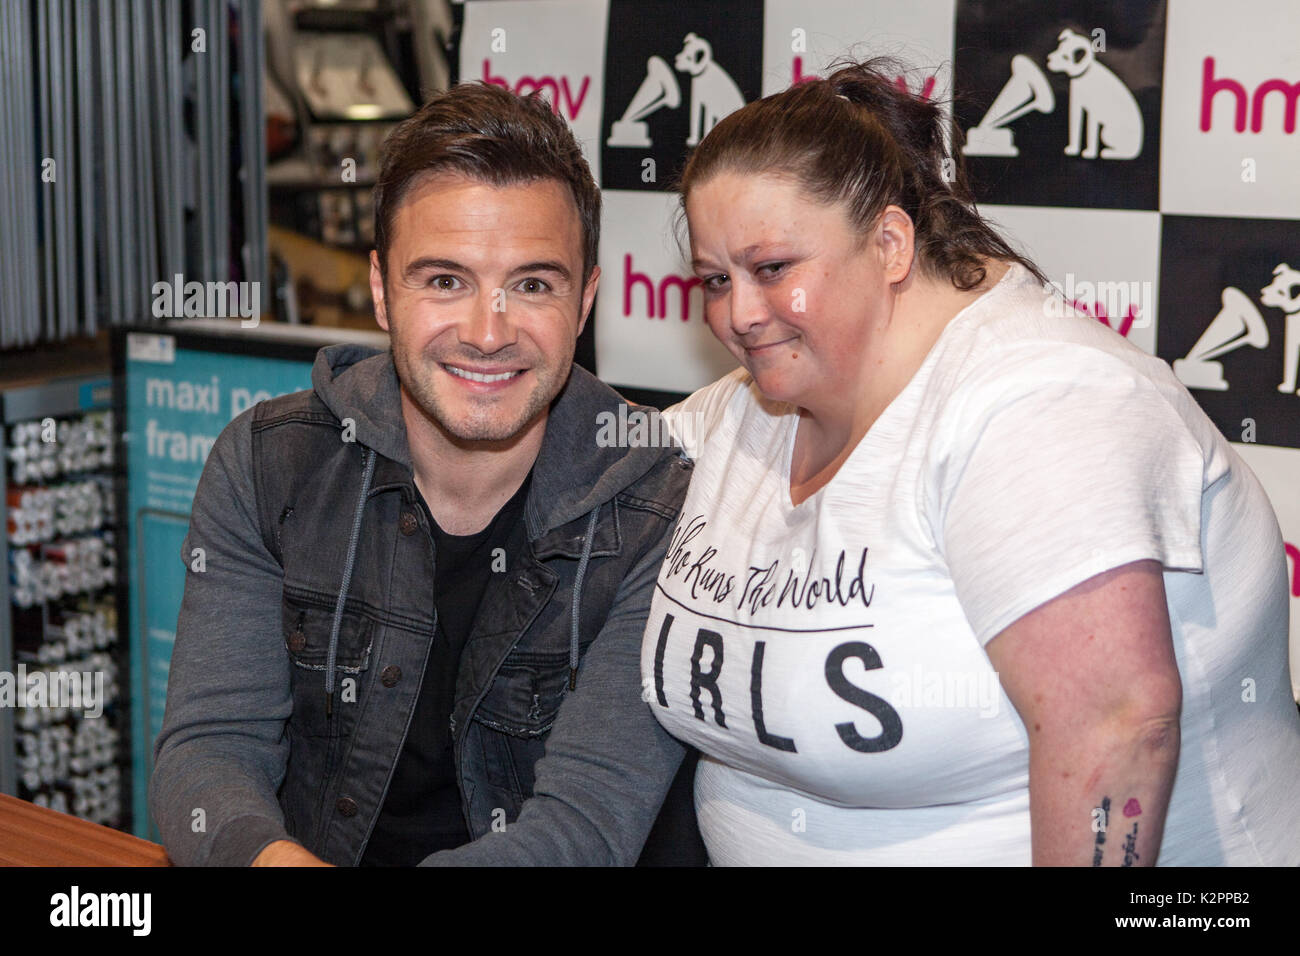 HMV Shop, High Street, Belfast, Northern Ireland. 31st August 2017. Pop Star Shane Filan was in Belfast to meet fans at the launch of his new Album 'Love Always' prior to his concert at the SSE Arena. Credit: Bonzo/Alamy Live News Stock Photo